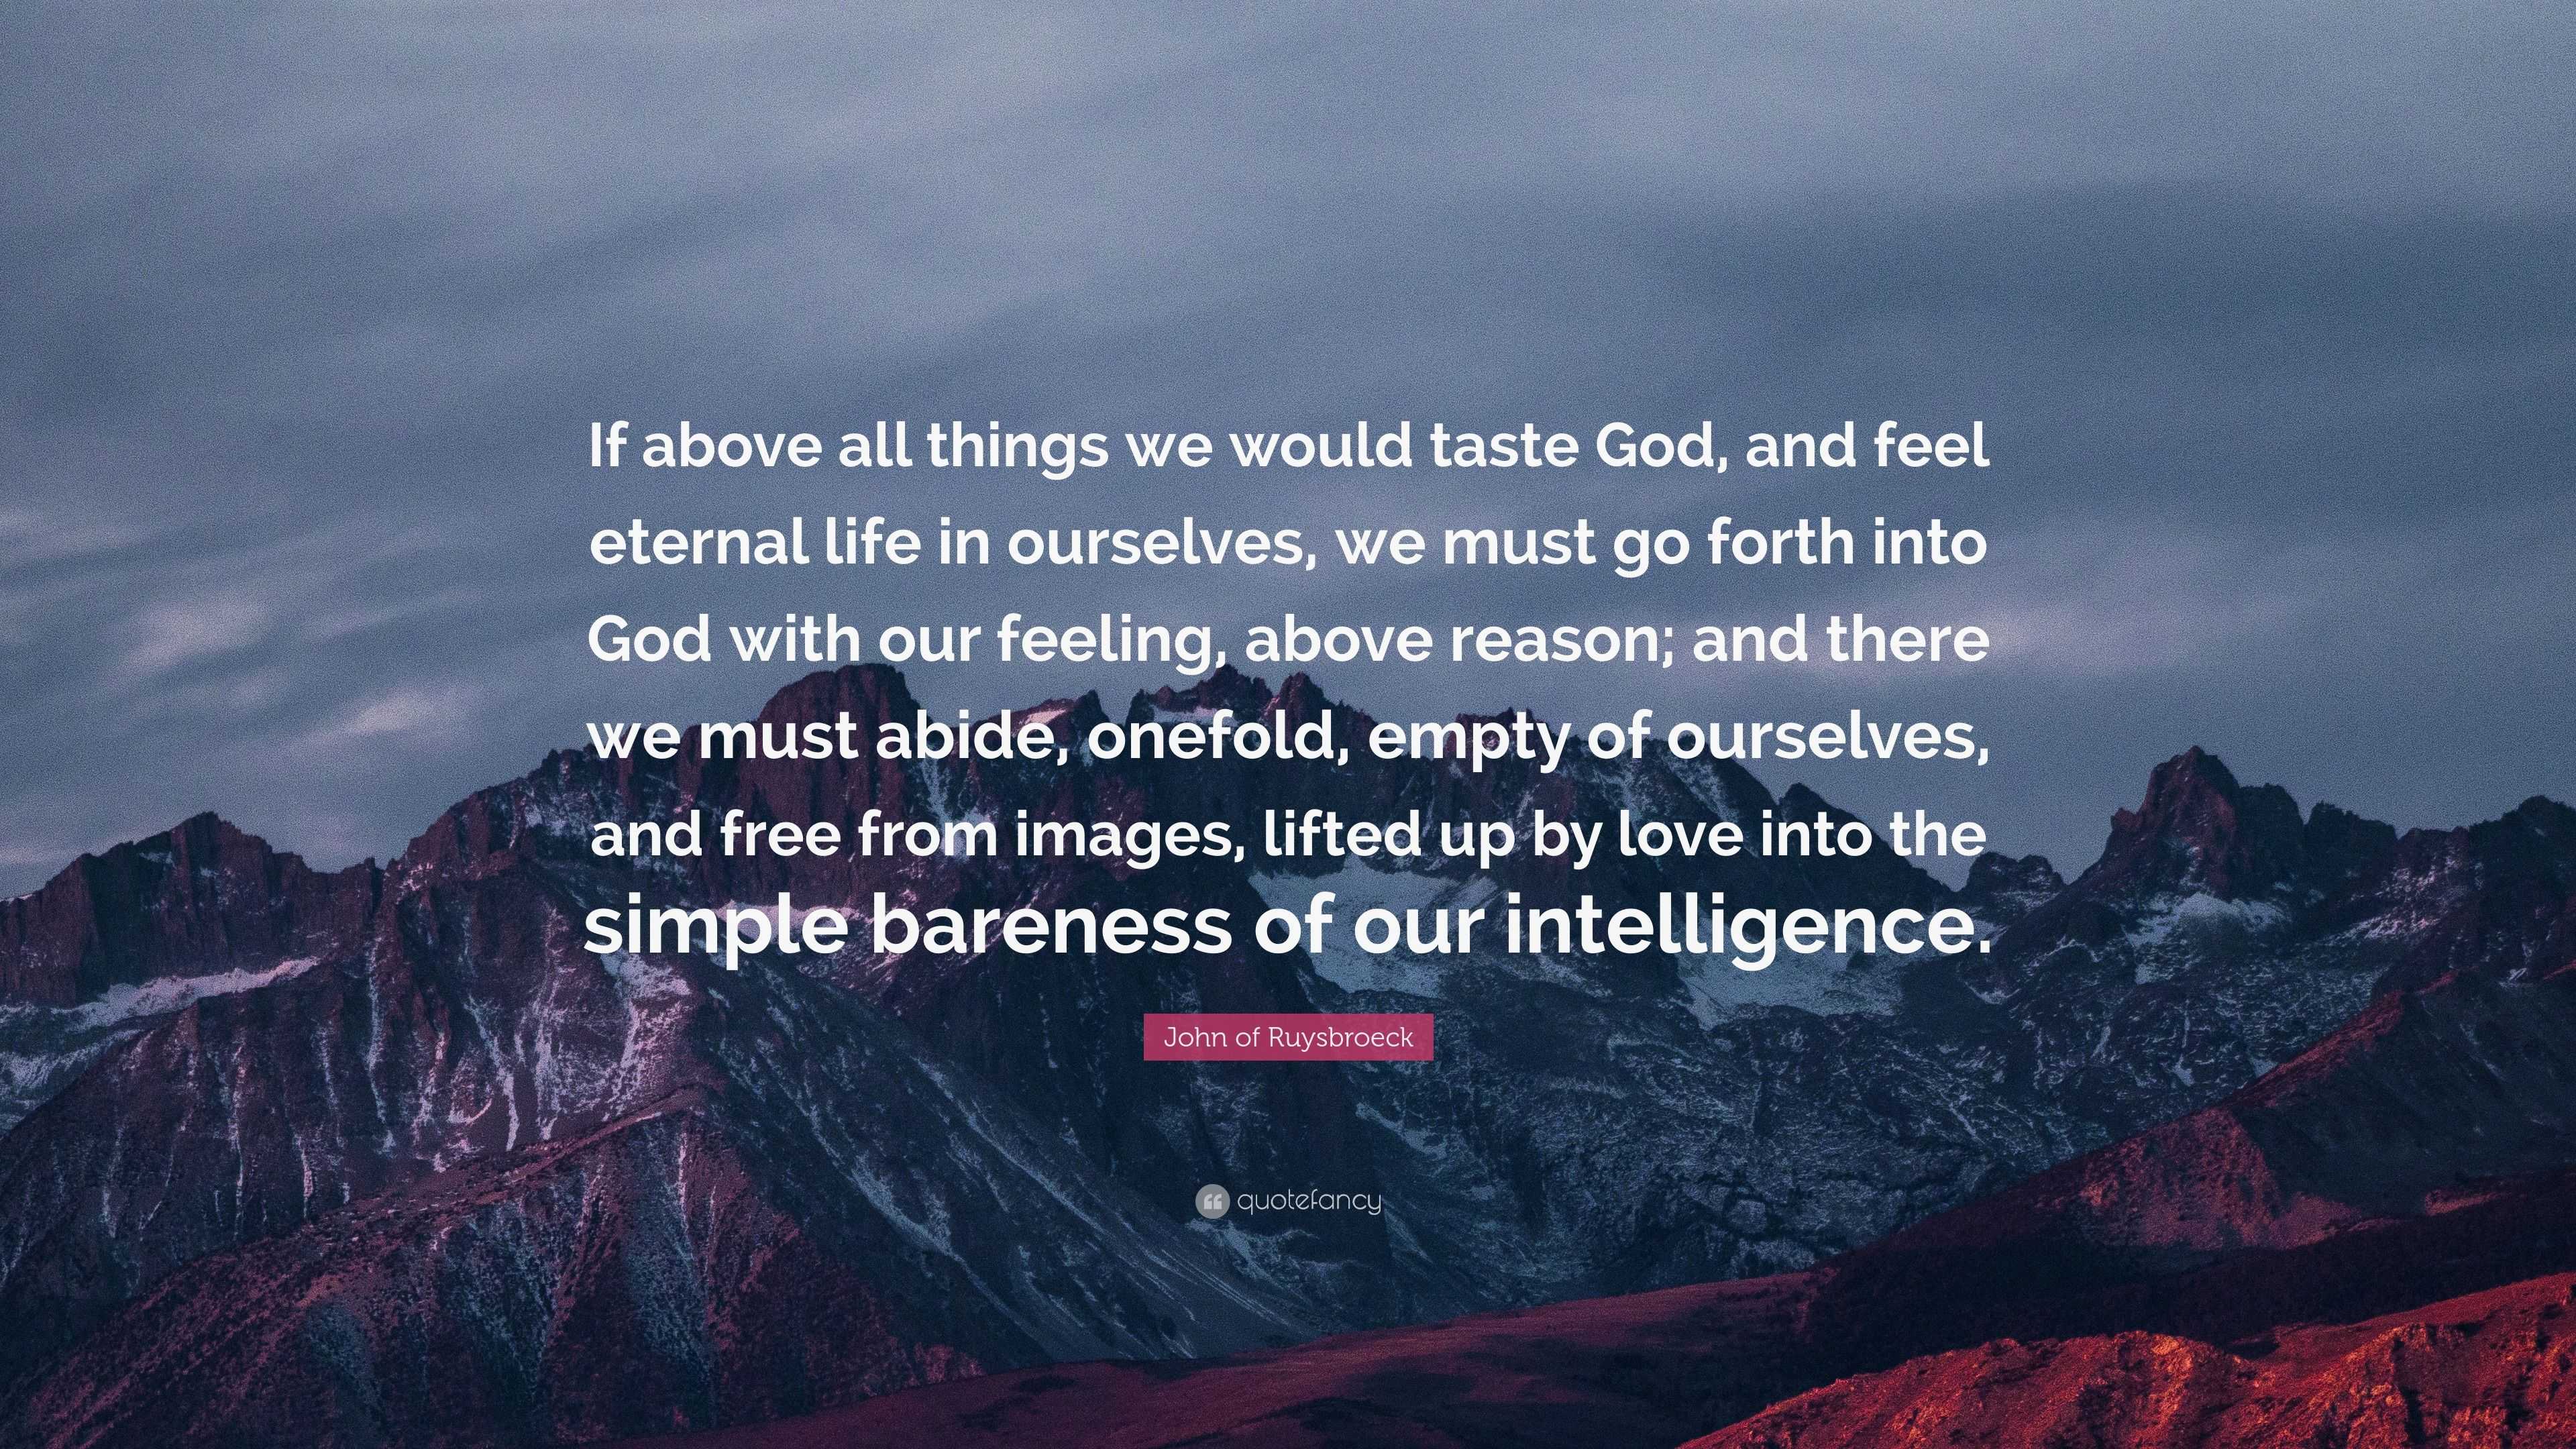 John of Ruysbroeck Quote “If above all things we would taste God and